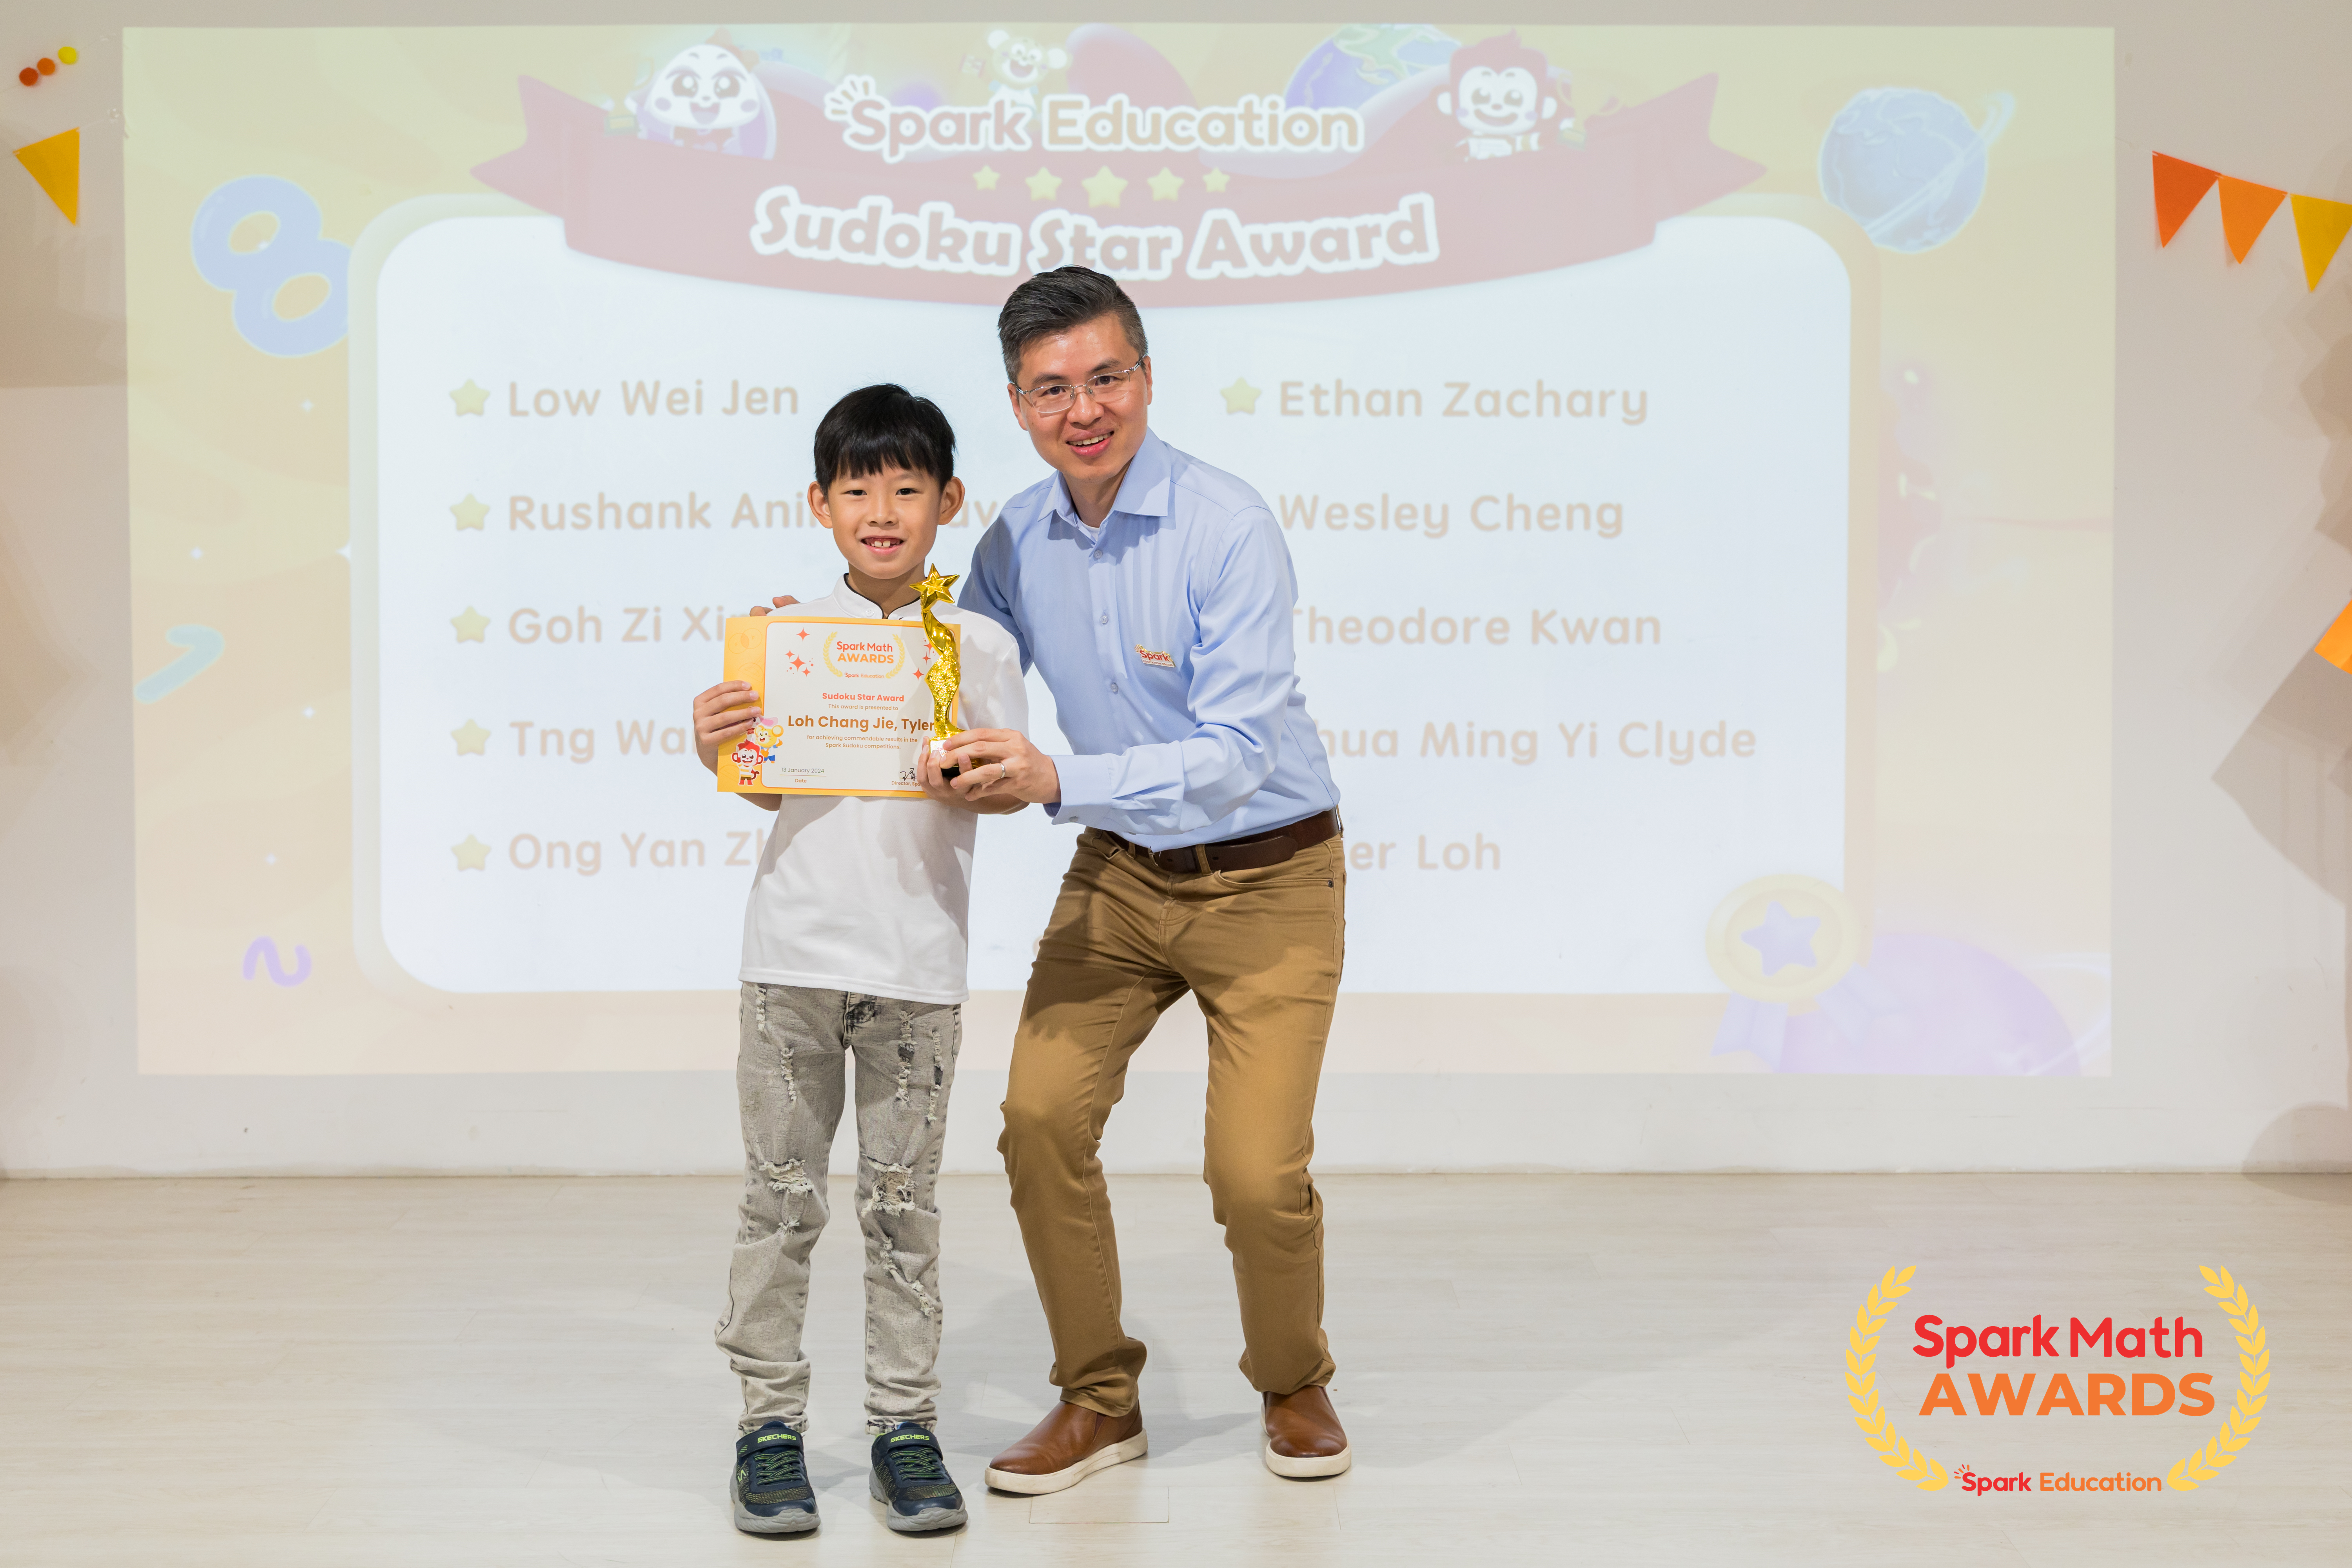 Mr. Xiaonan Wang, Co-founder and GM of Spark Education, presenting Sudoku Star awards to our top 10 Spark Math champs in various Spark Sudoku Cup competitions.